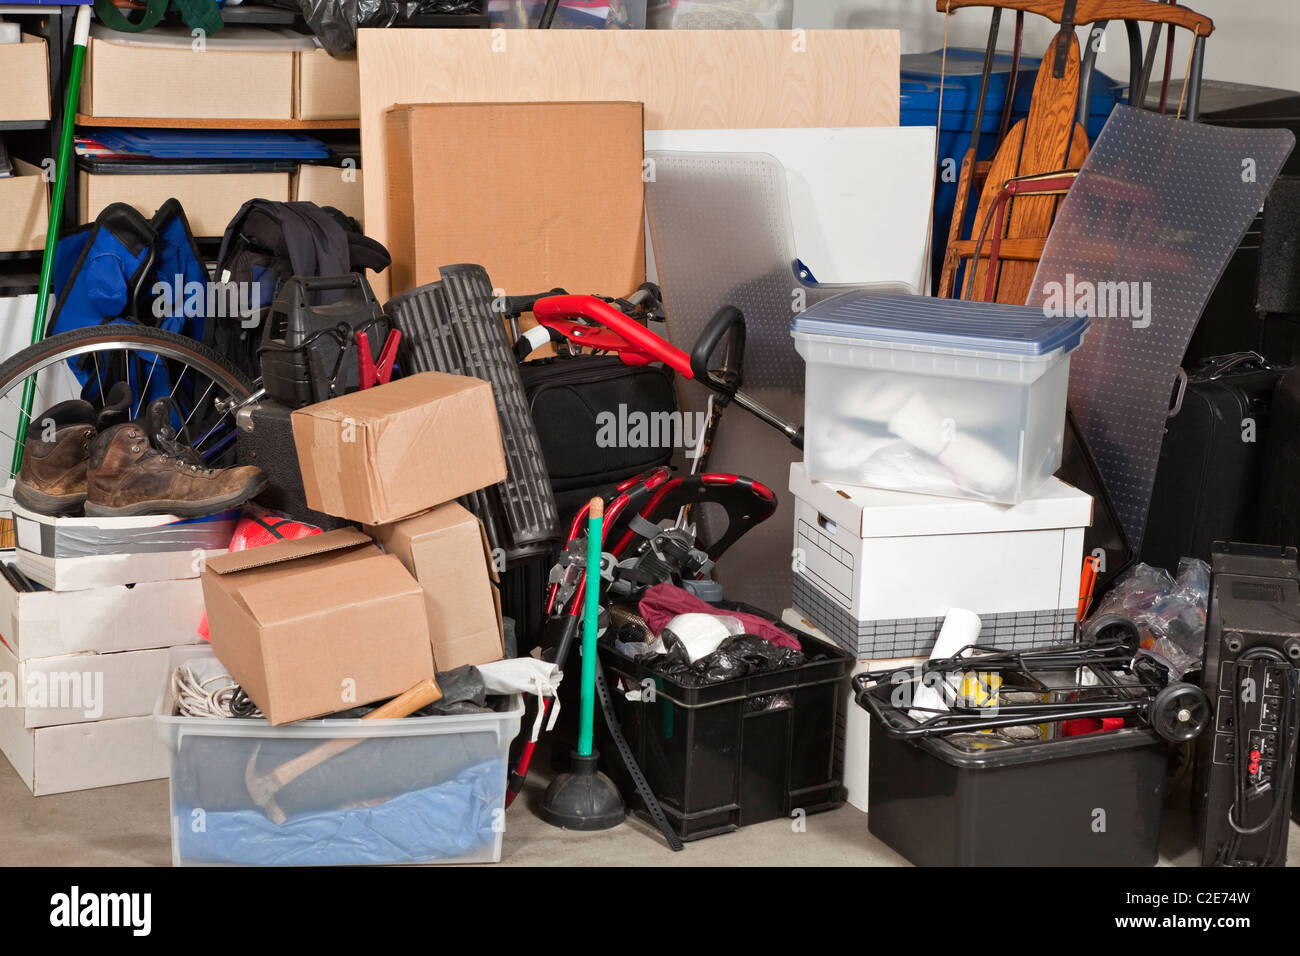 Pile of boxes junk inside a residential garage. Stock Photo